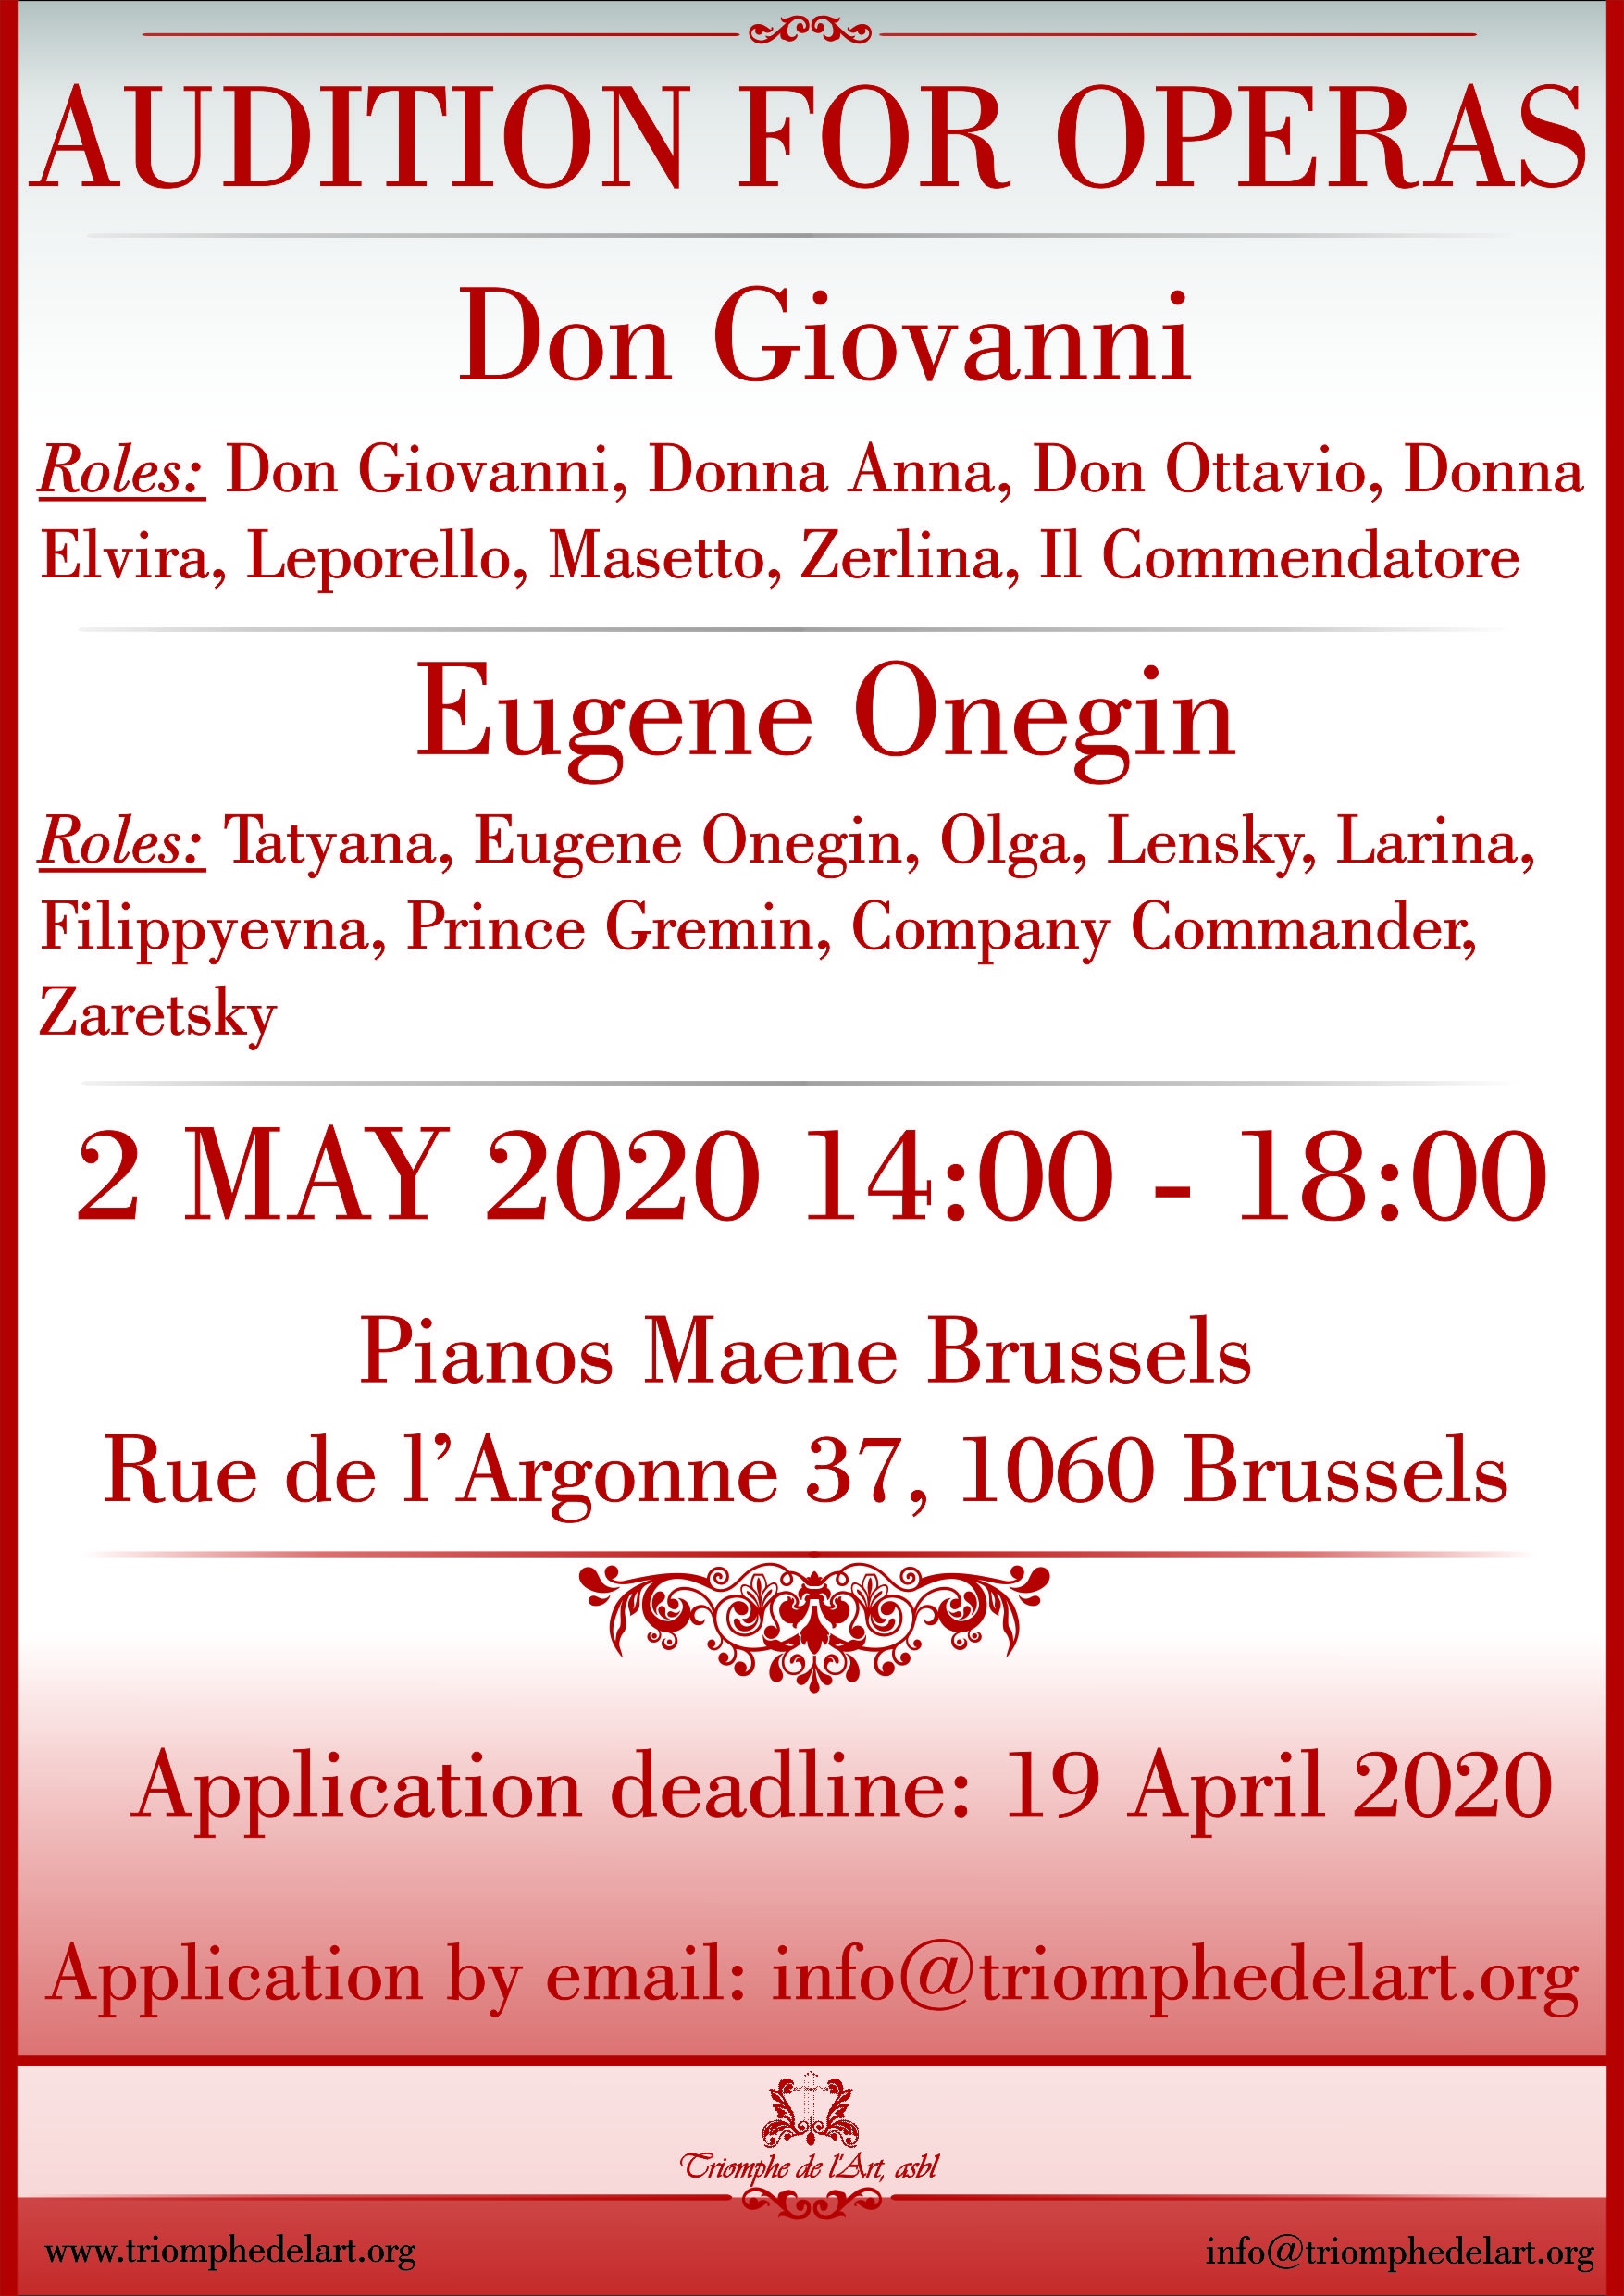 Audition operas Don Giovanni and Eugene Onegin